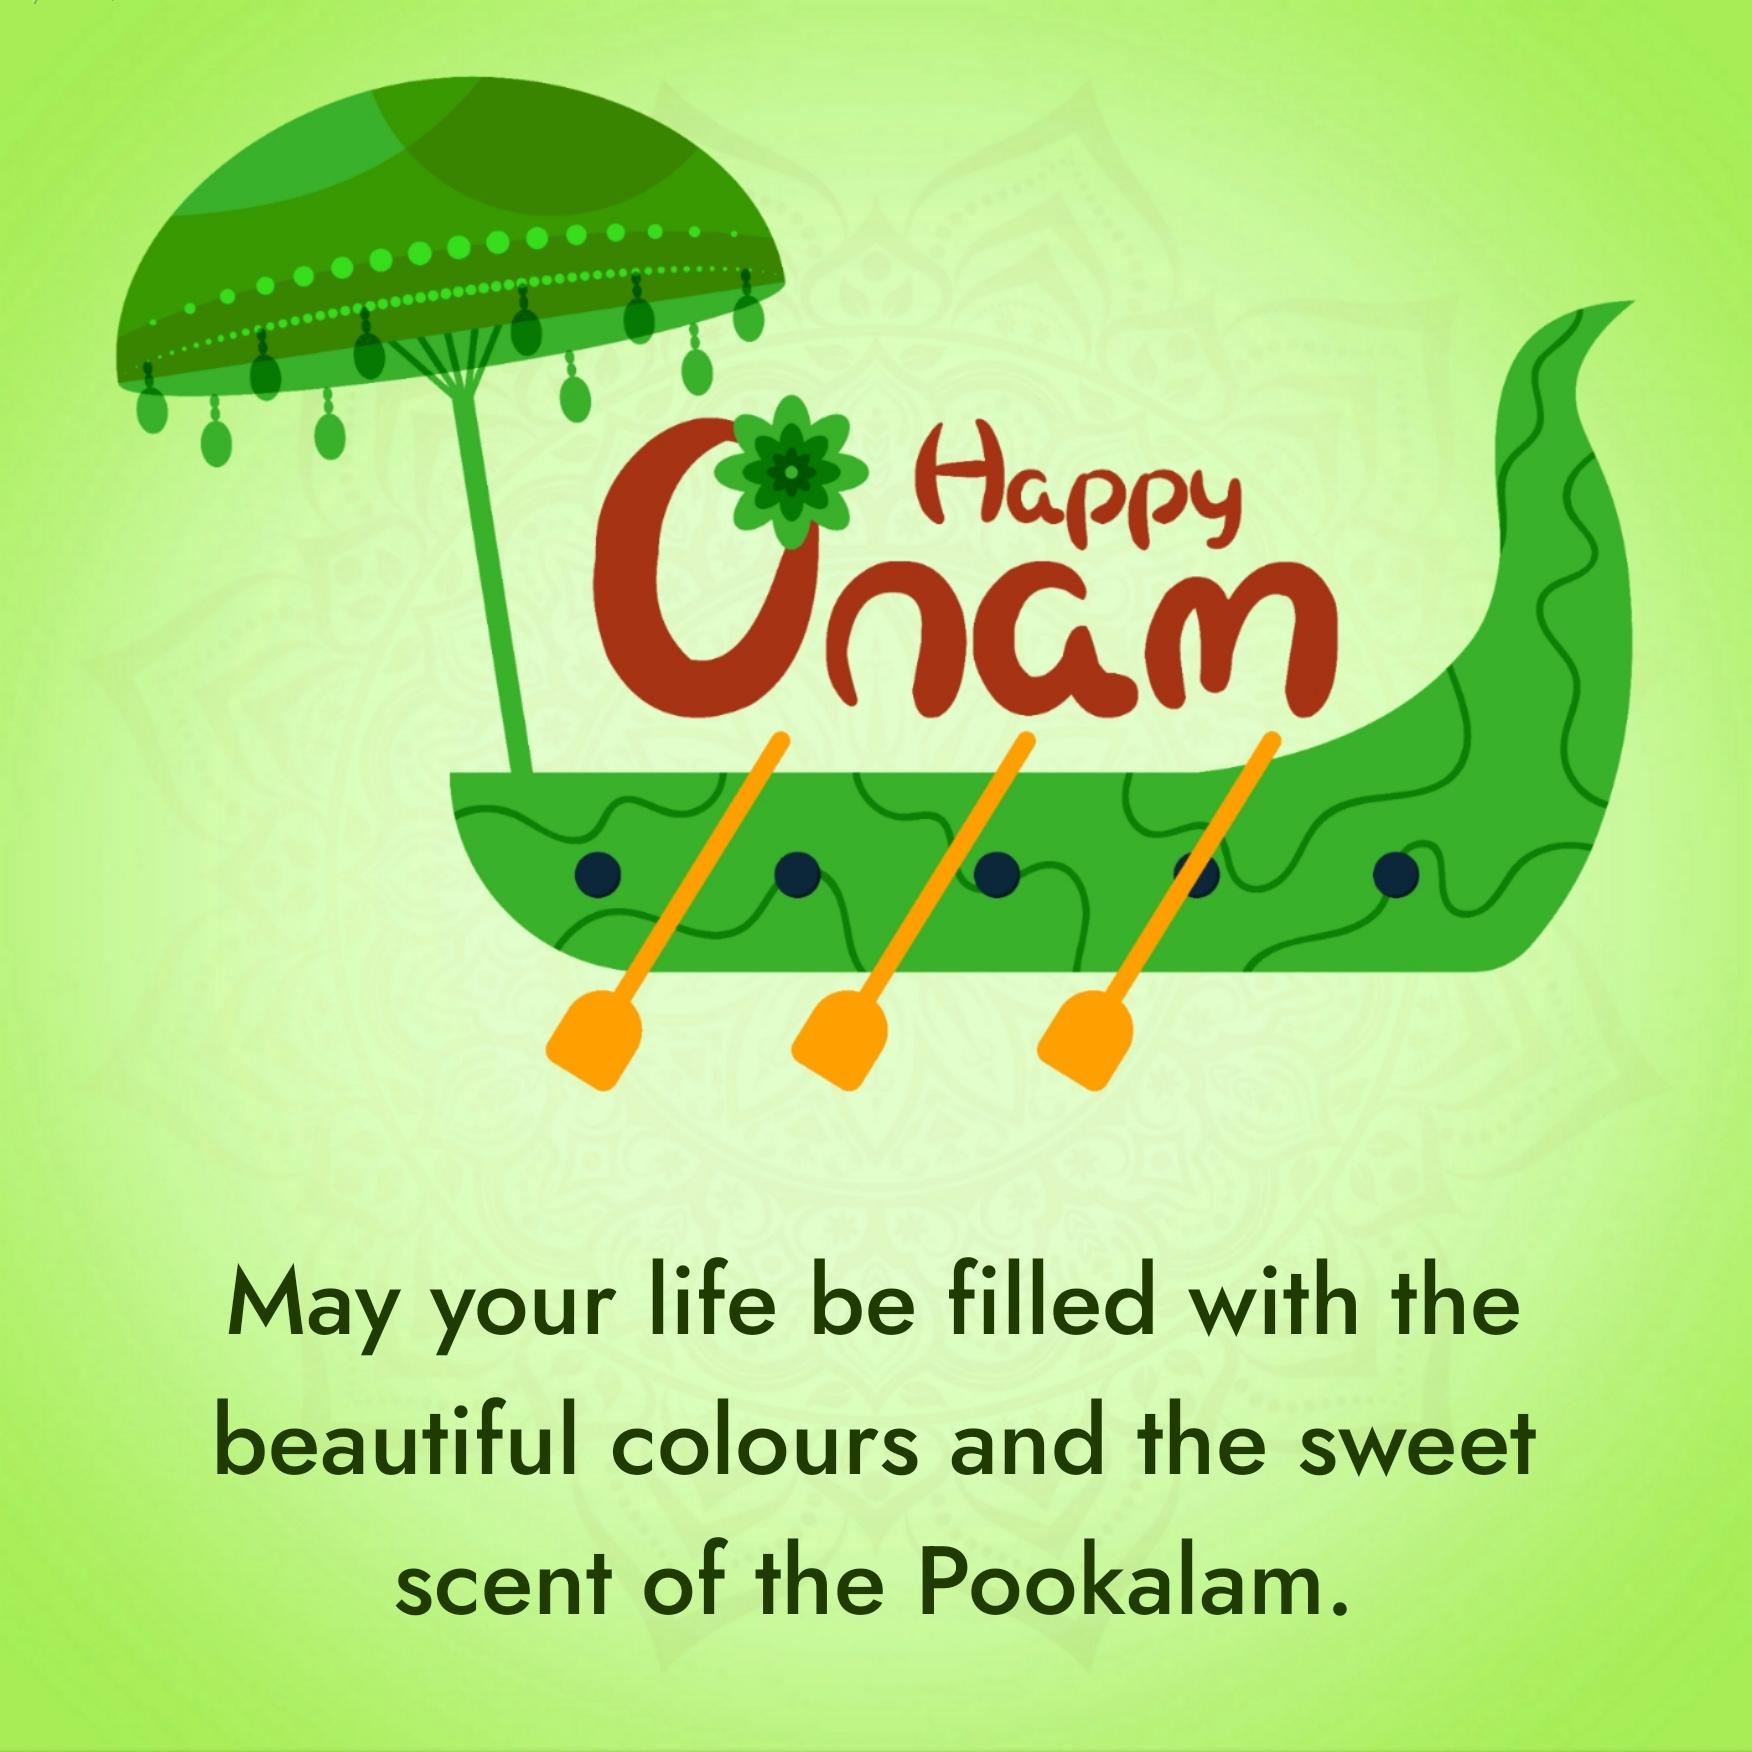 May your life be filled with the beautiful colours and the sweet scent of the Pookalam